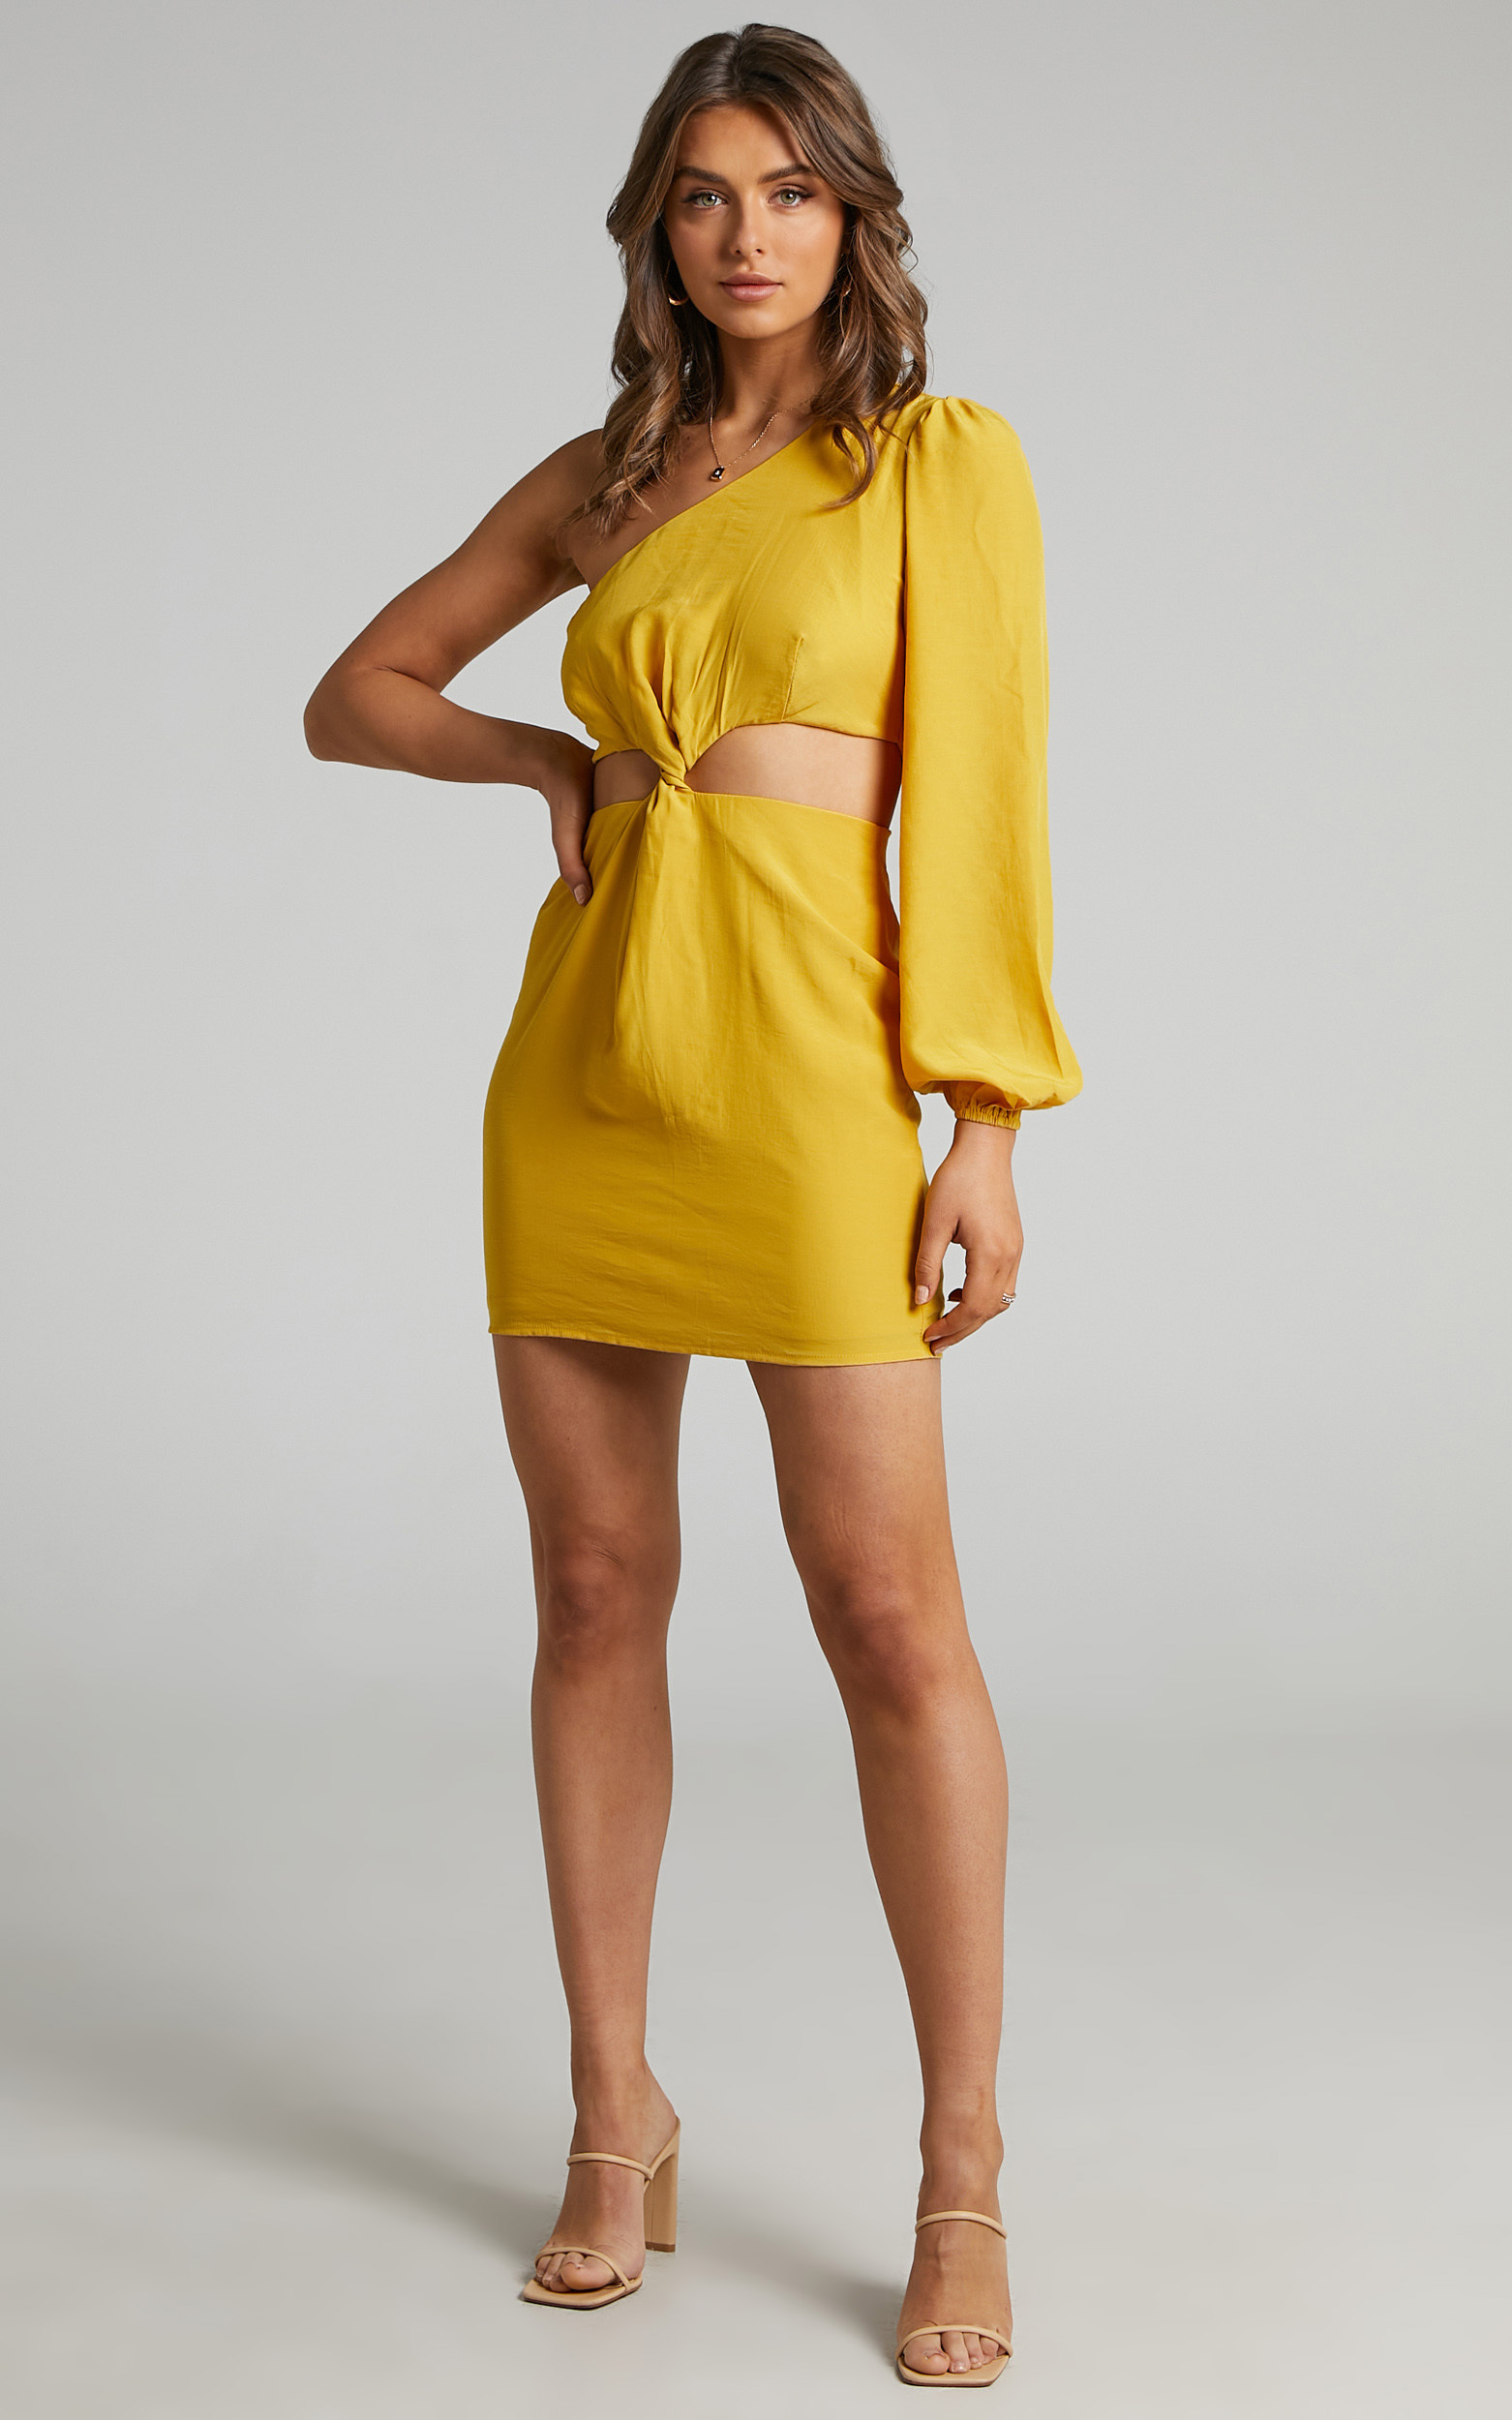 Glannica One Shoulder Mini Dress with Twist Front in Yellow - 06, YEL1, hi-res image number null